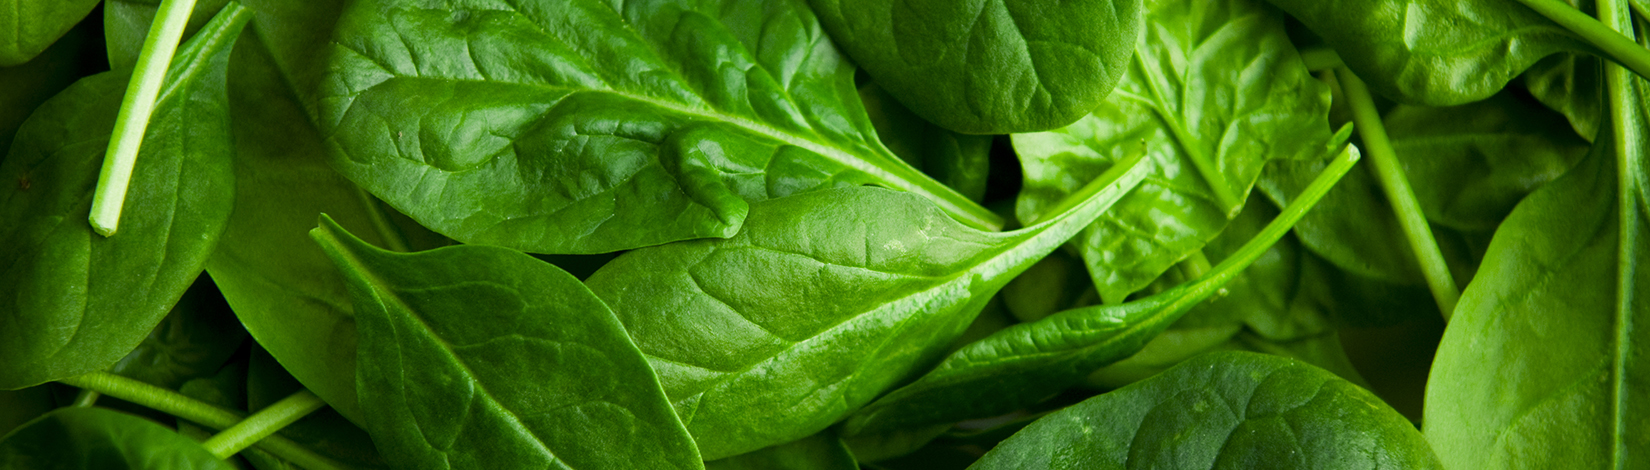 A close up photo of spinach.